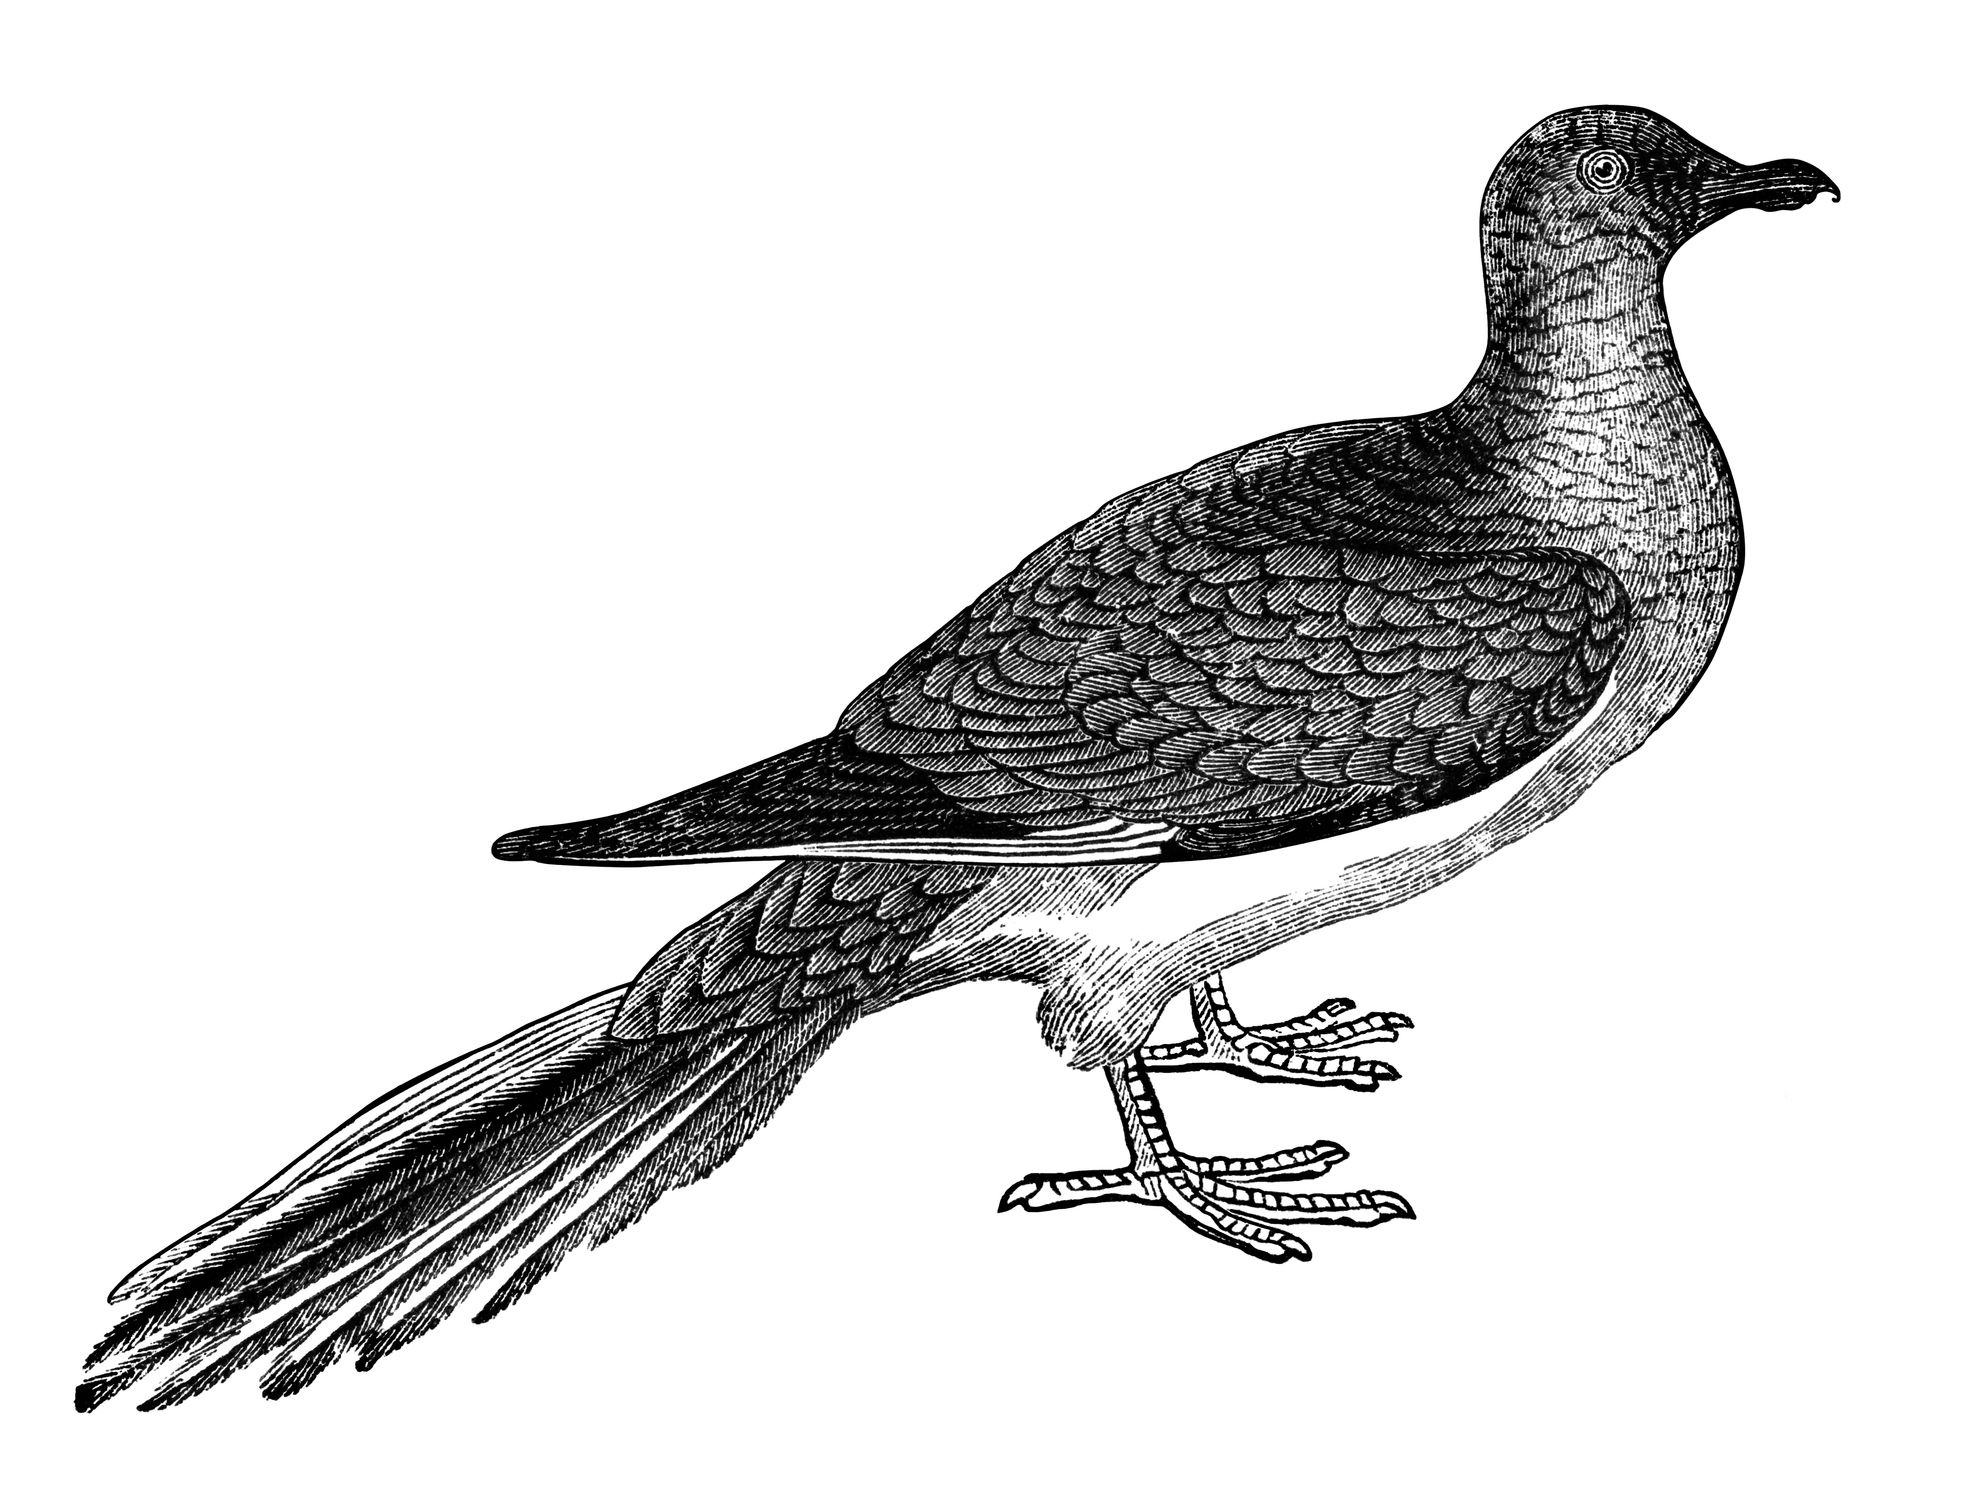 <p>Once <a href="https://johnjames.audubon.org/conservation/billions-none-extinction-passenger-pigeon">numbering in the billions</a>, the Passenger Pigeon was driven to near extinction in the 20th century due to overhunting and habitat destruction. Their large-scale slaughter for meat and feathers, combined with deforestation, led to their rapid decline. After Martha, the last known member of the species <a href="https://www.audubon.org/magazine/may-june-2014/why-passenger-pigeon-went-extinct">died in captivity in 1914</a>, the species was declared officially extinct.</p>